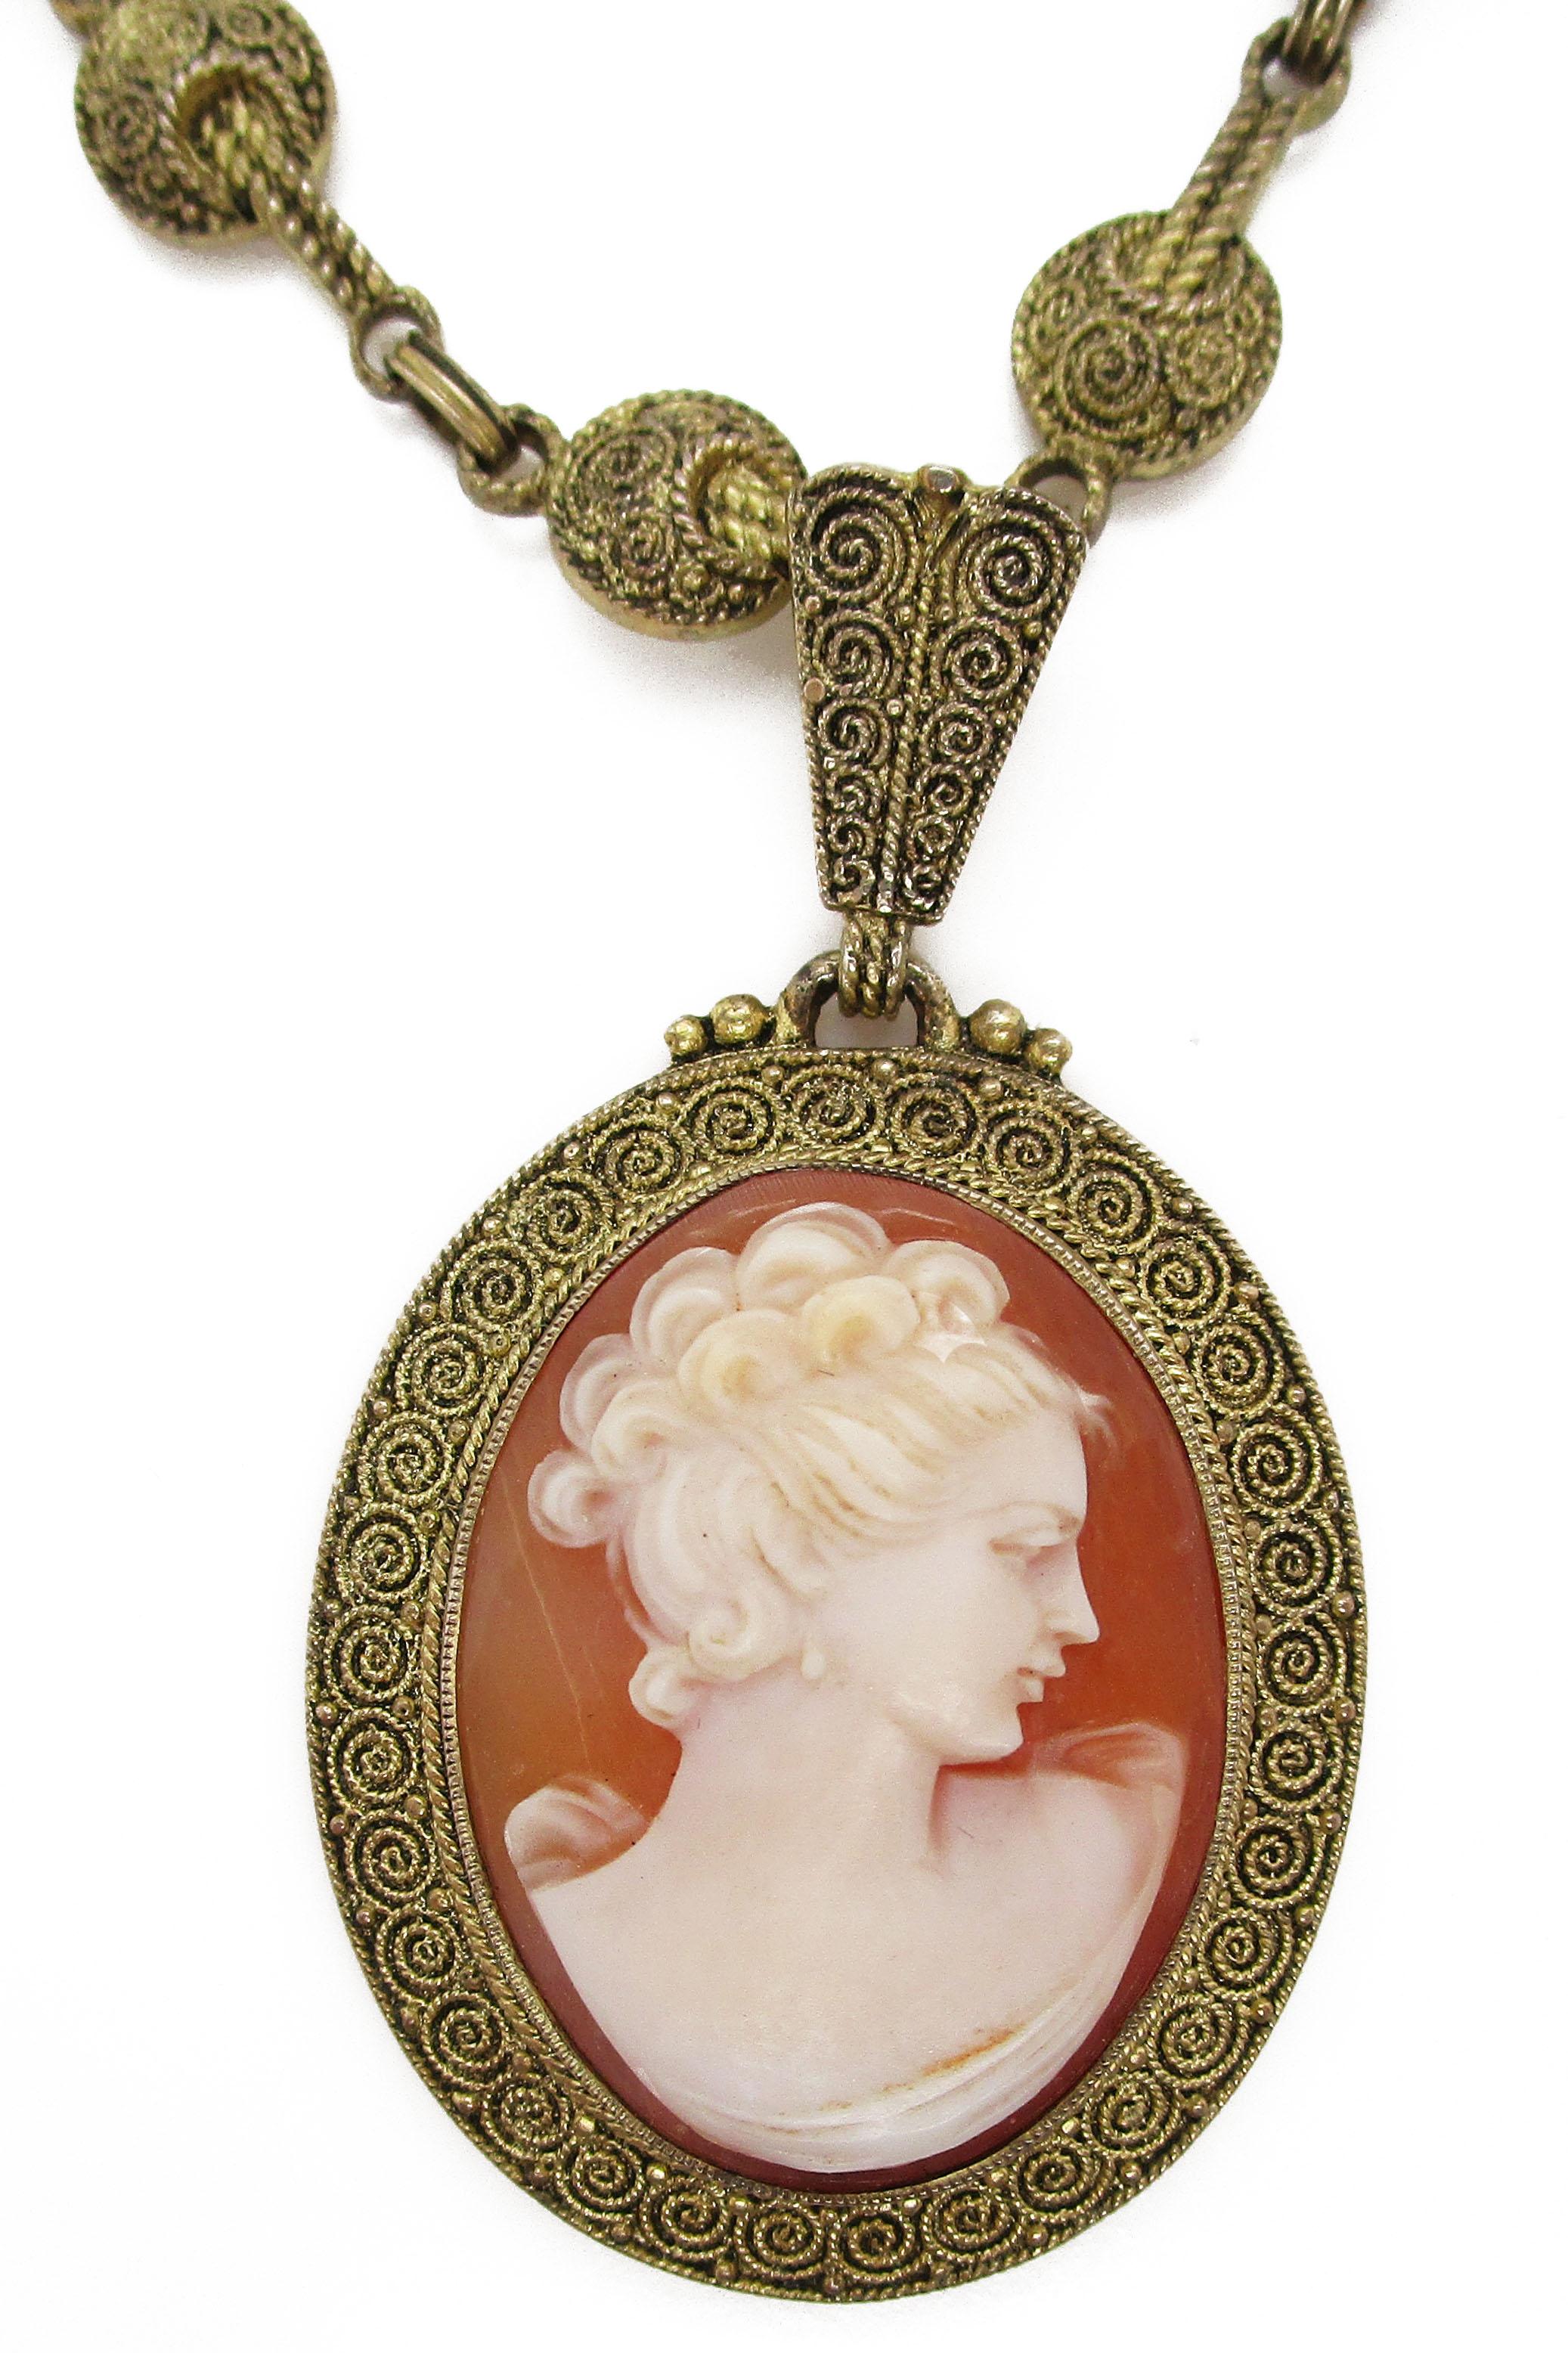 This is a magnificent shell cameo pendant and necklace with an enchanting gold vermeil sterling silver chain that dates back to the early 1900's and is signed Theodor Fahrner! Both the chain and the cameo pendant are signed with the classic TF